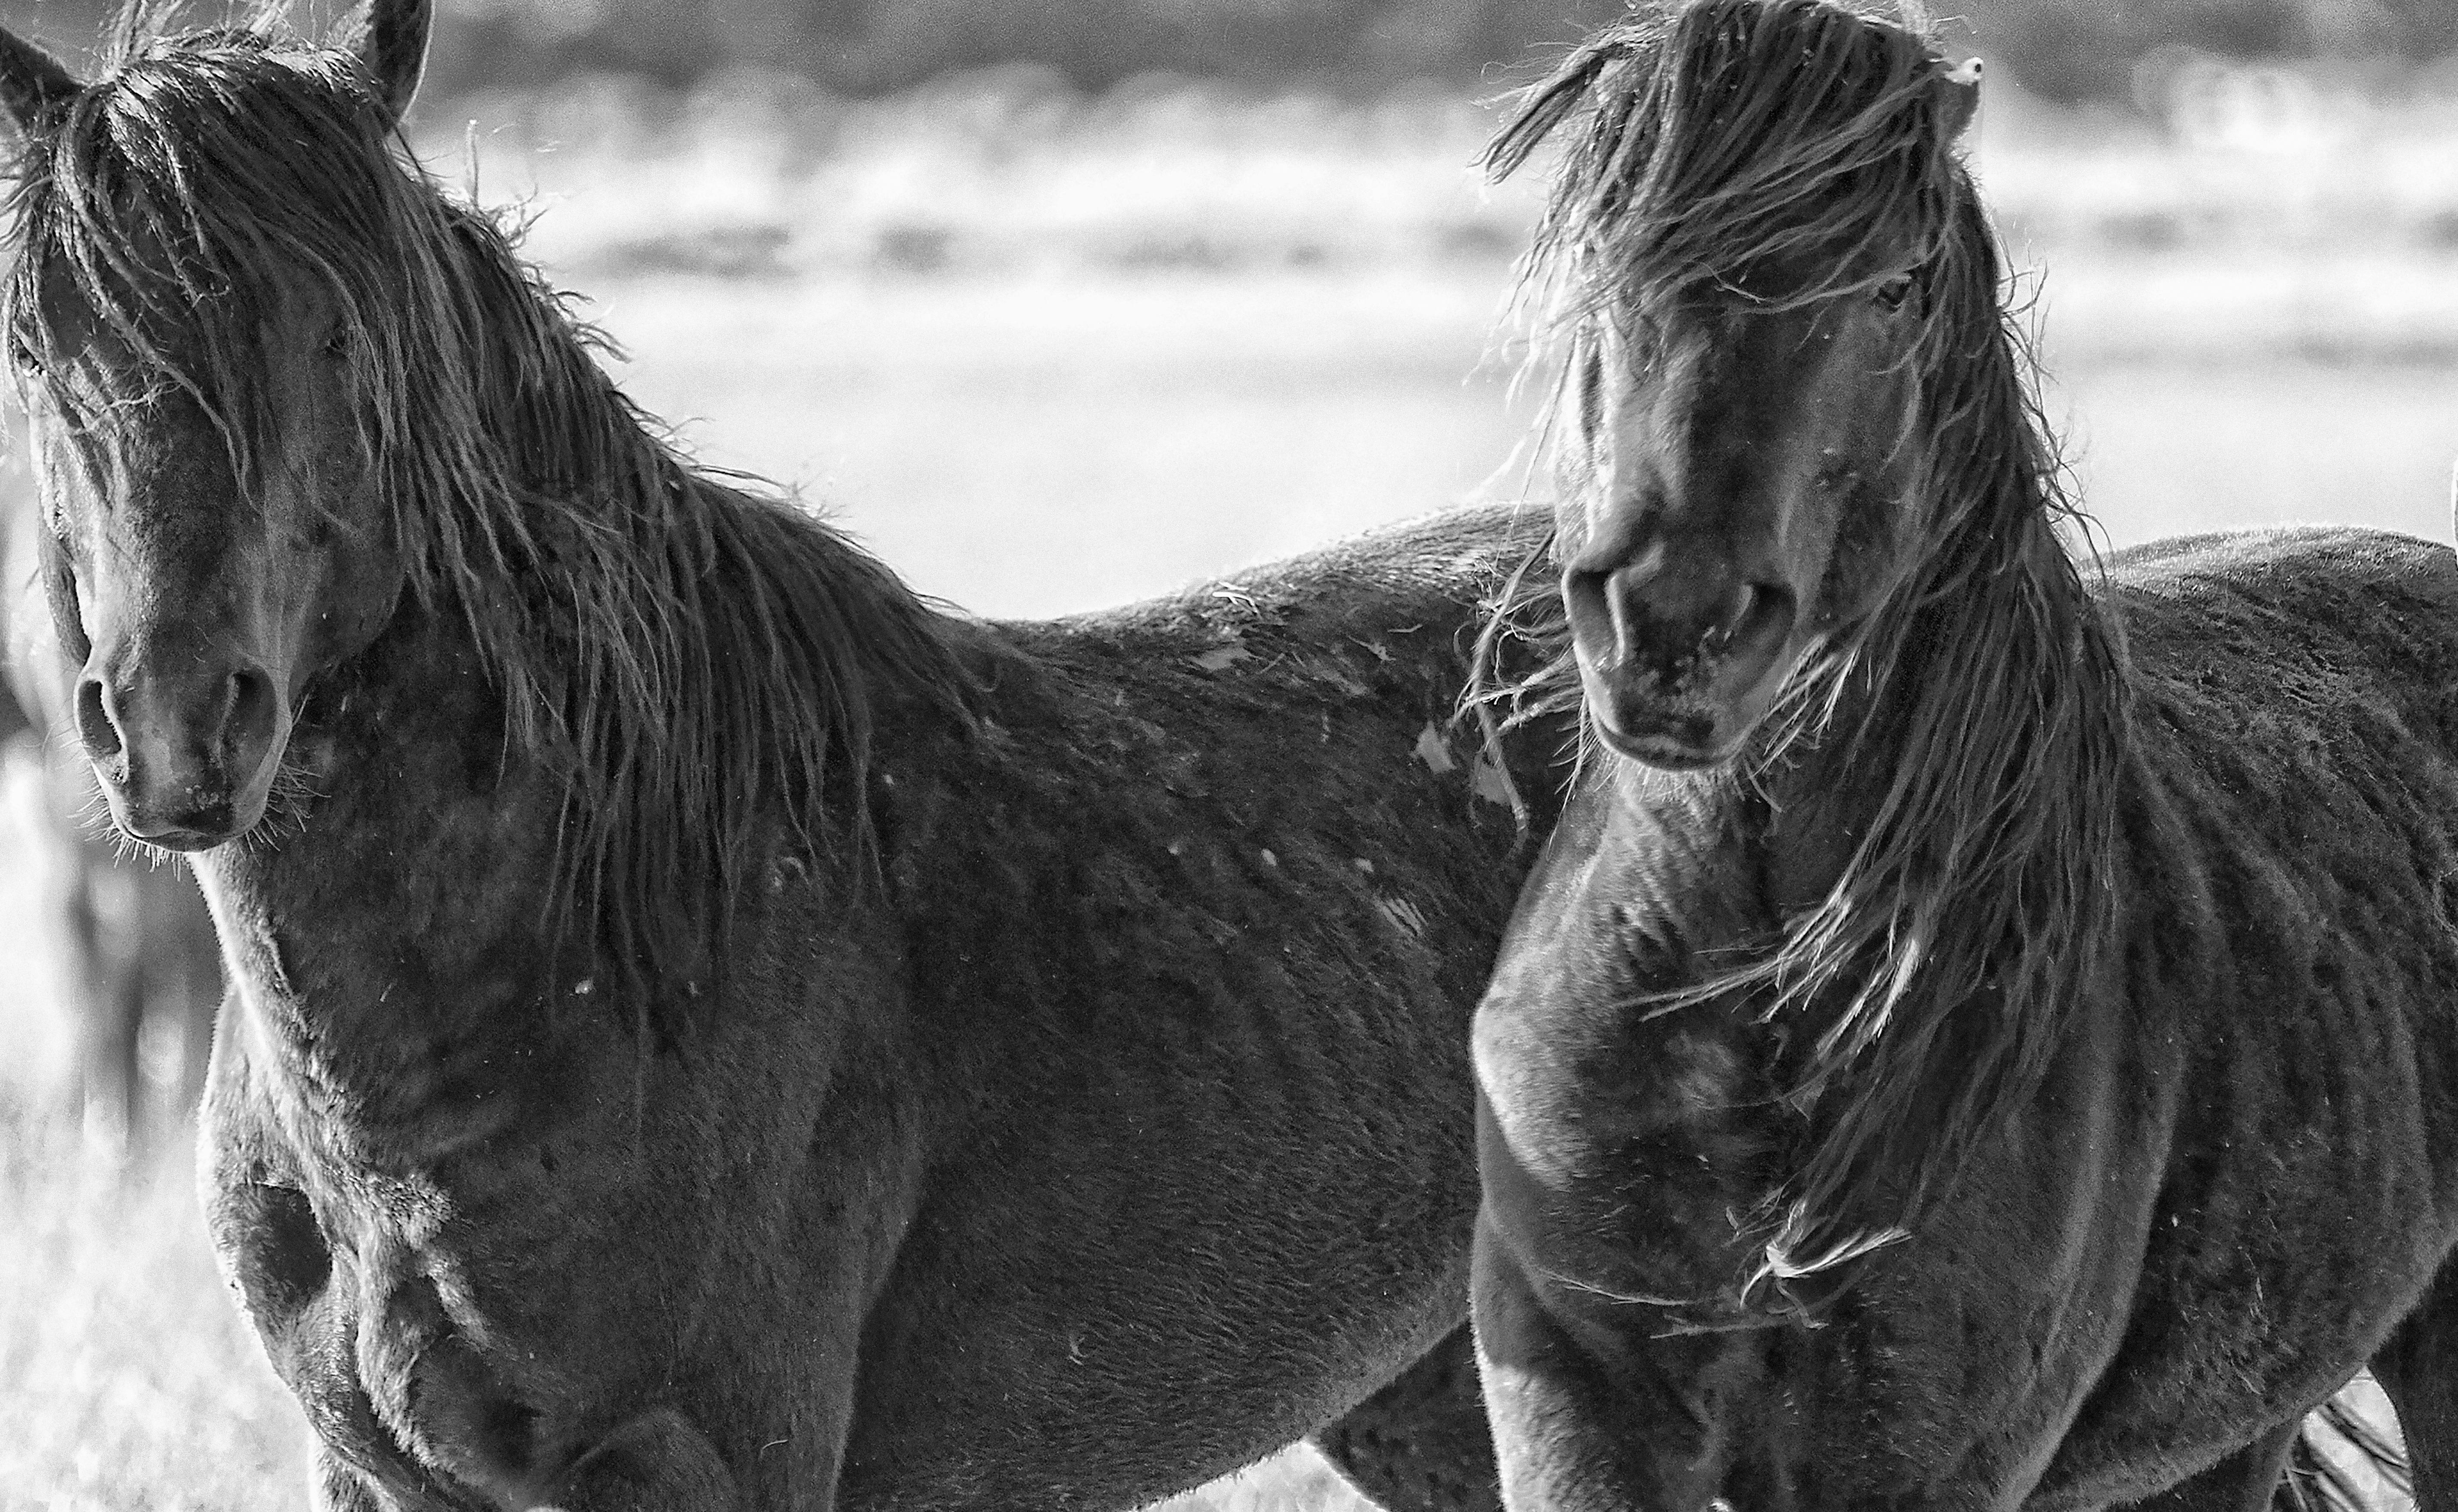 Animal Print Shane Russeck - Band of Brothers 24x40 - Photographie de chevaux sauvages (prix spécial 1stdibs)